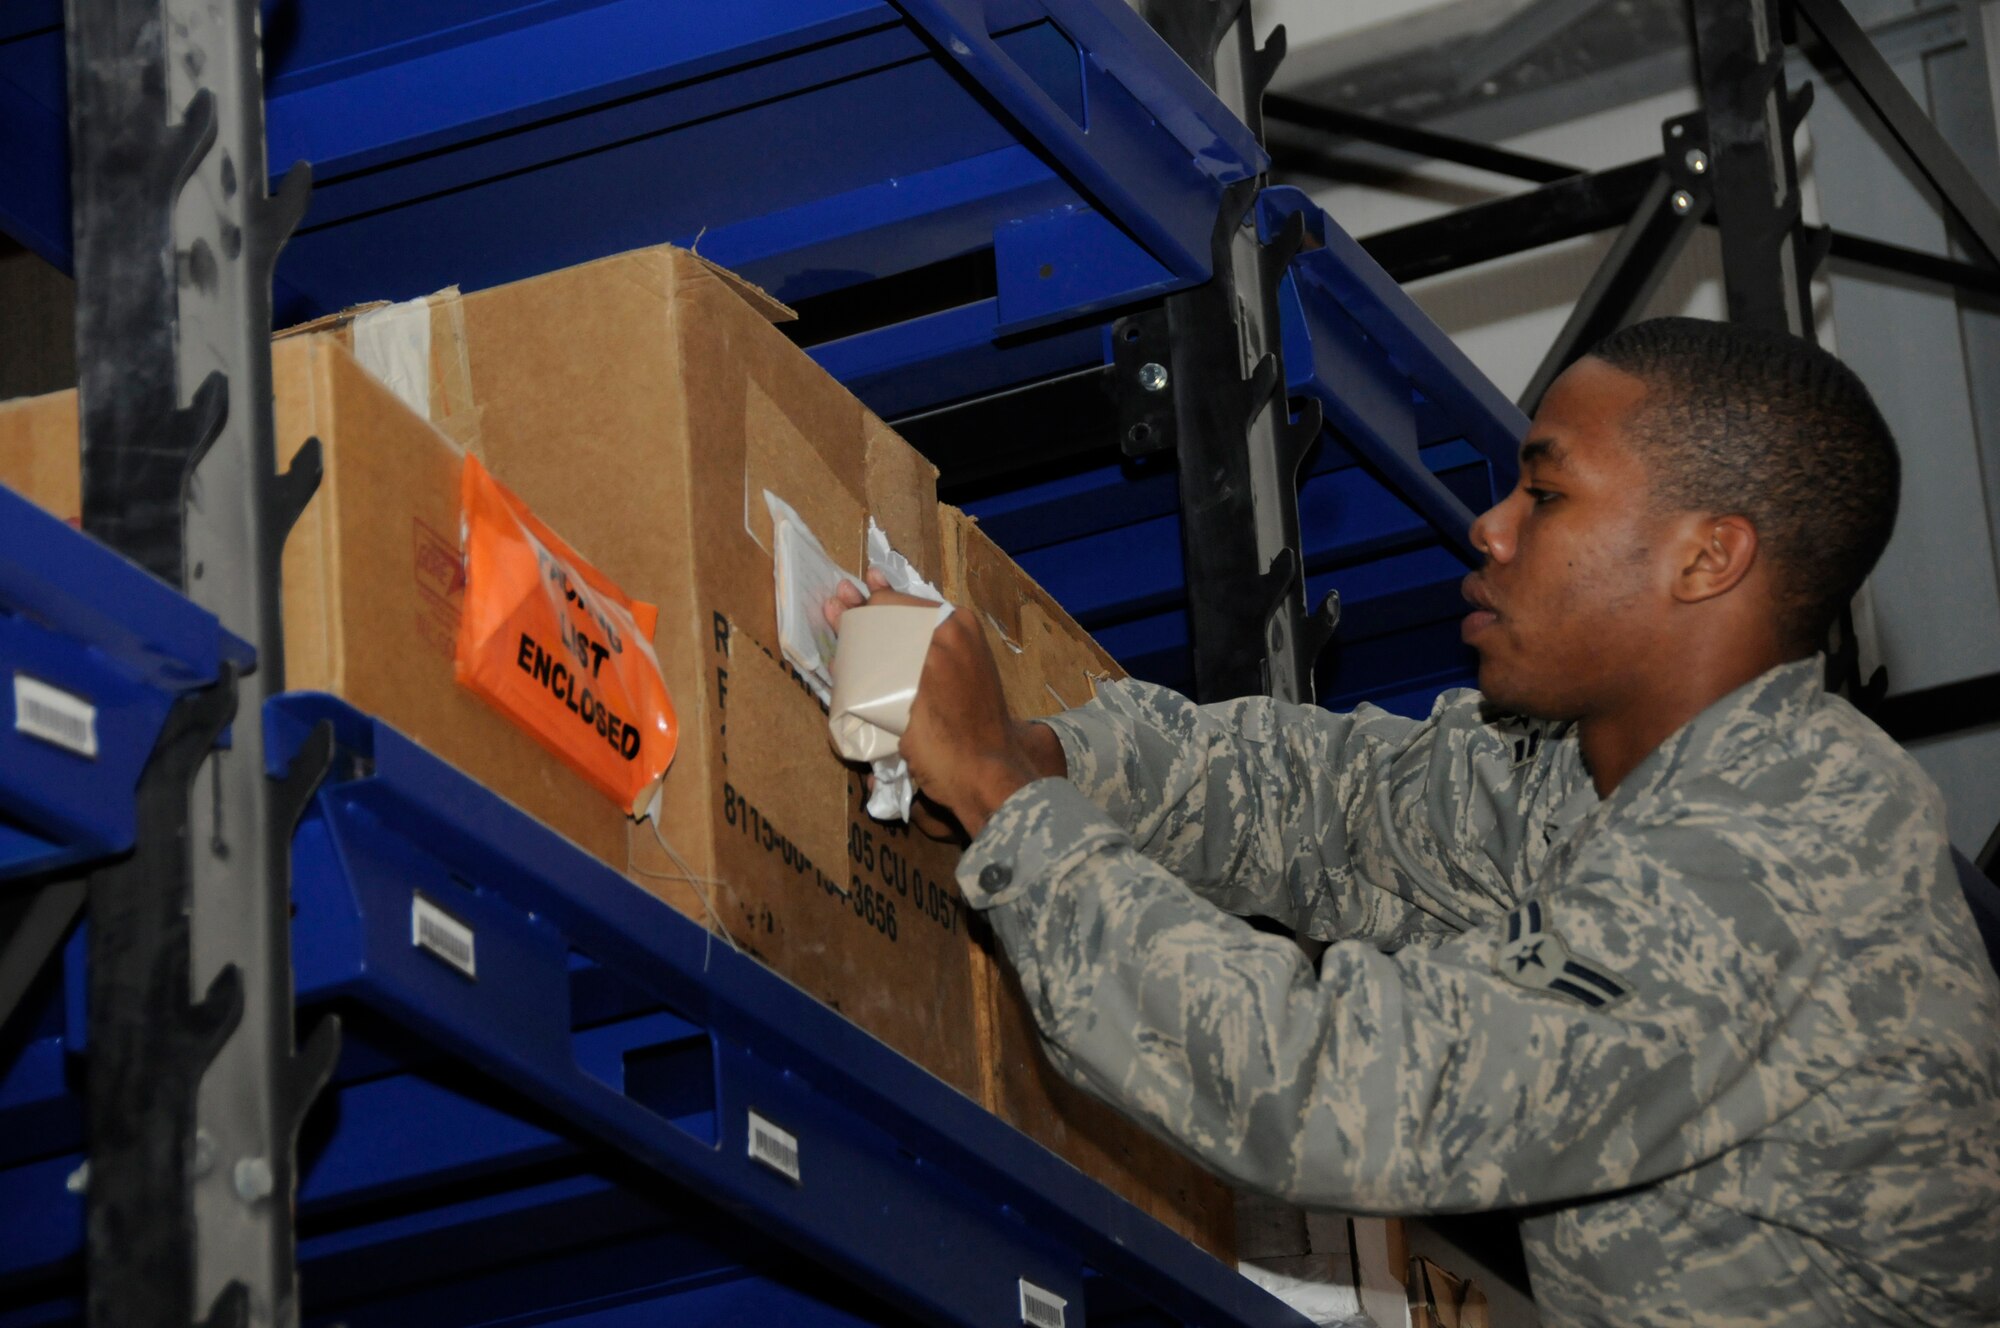 Airman 1st Class Marcus Bostic, flight service center apprentice assigned to the 379th Expeditionary Logistics Readiness Squadron, in checks unserviceable aircraft parts by matching stock numbers and part numbers Nov. 6, at an undisclosed air base in Southwest Asia.  Airman Bostic, a native of Cincinnati, Ohio, is deployed from Moody Air Force Base, Ga., in support of Operations Iraqi and Enduring Freedom and Joint Task Force-Horn of Africa. (U.S. Air Force photo by Staff Sgt. Darnell T. Cannady/Released)